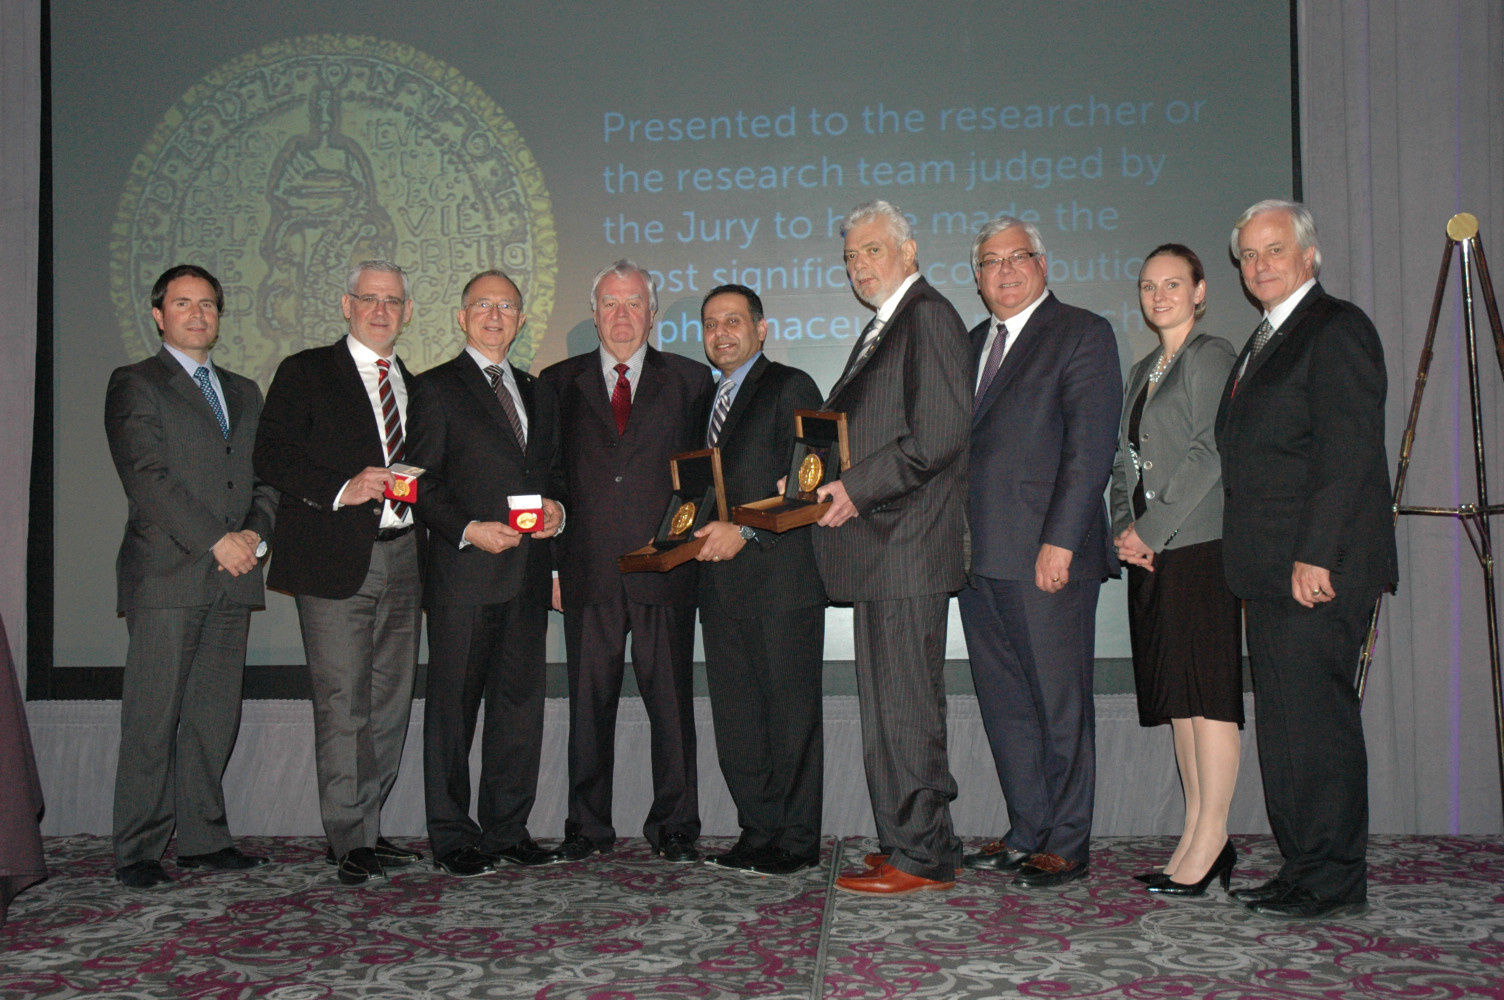 2013 - The 2013 Rx&D Health Research Foundation Medal of Honour awarded 
to Dr. Julio Montaner and the Honourable Kelvin K. Oglivie